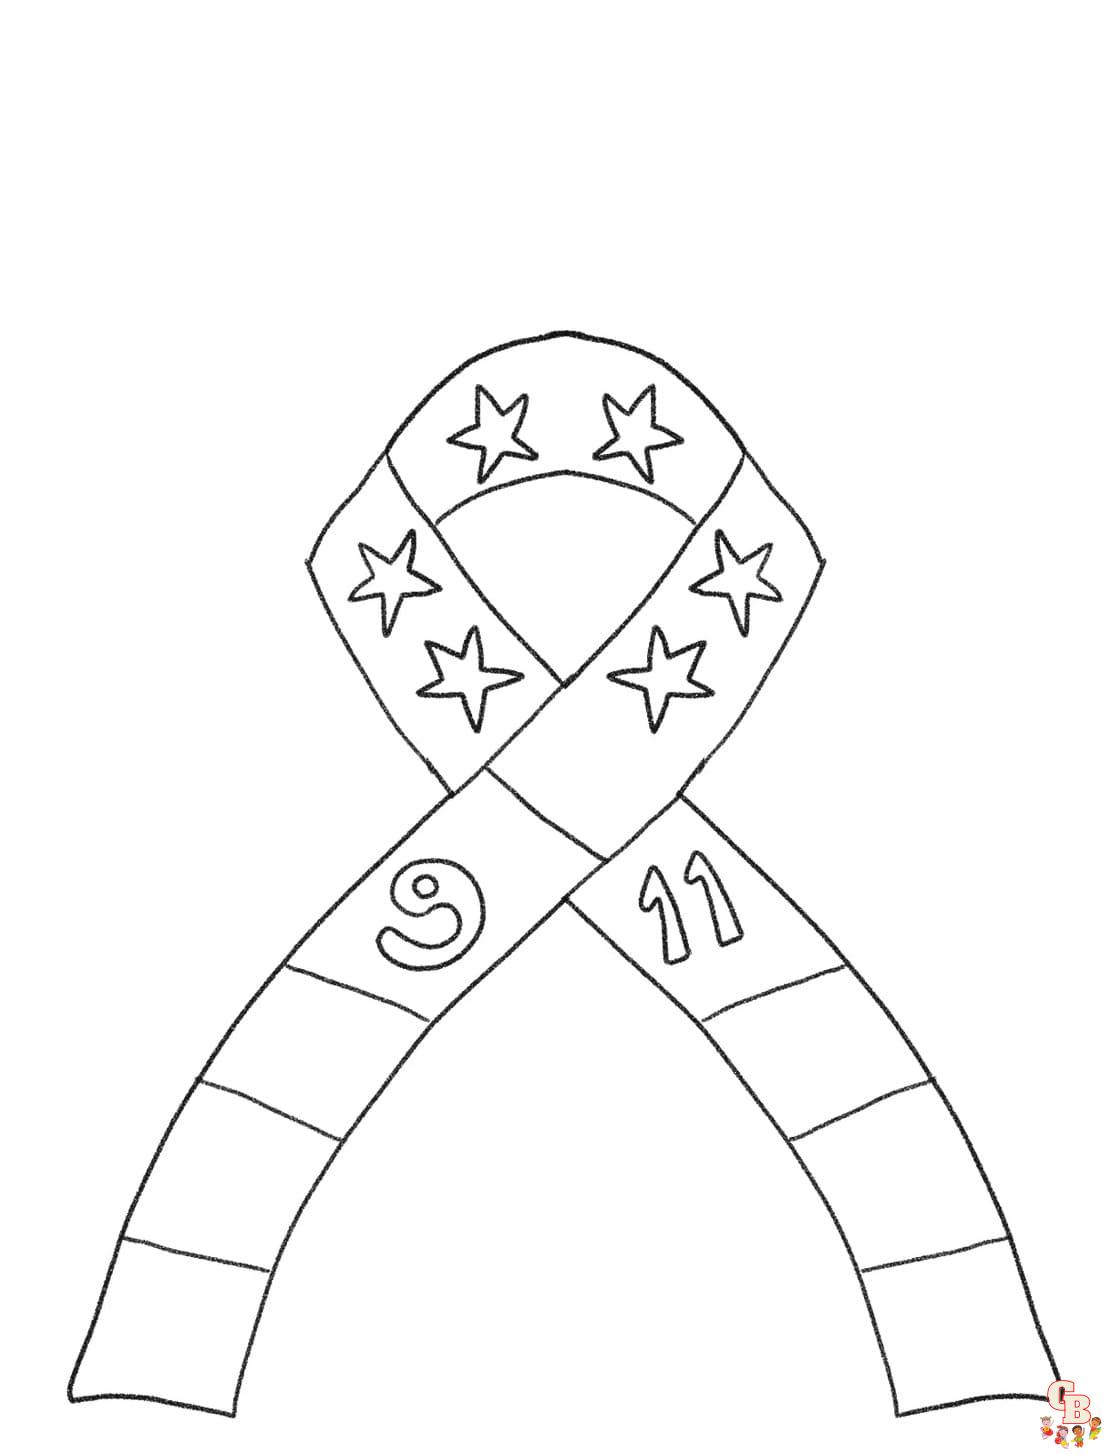 9/11 Coloring Pages